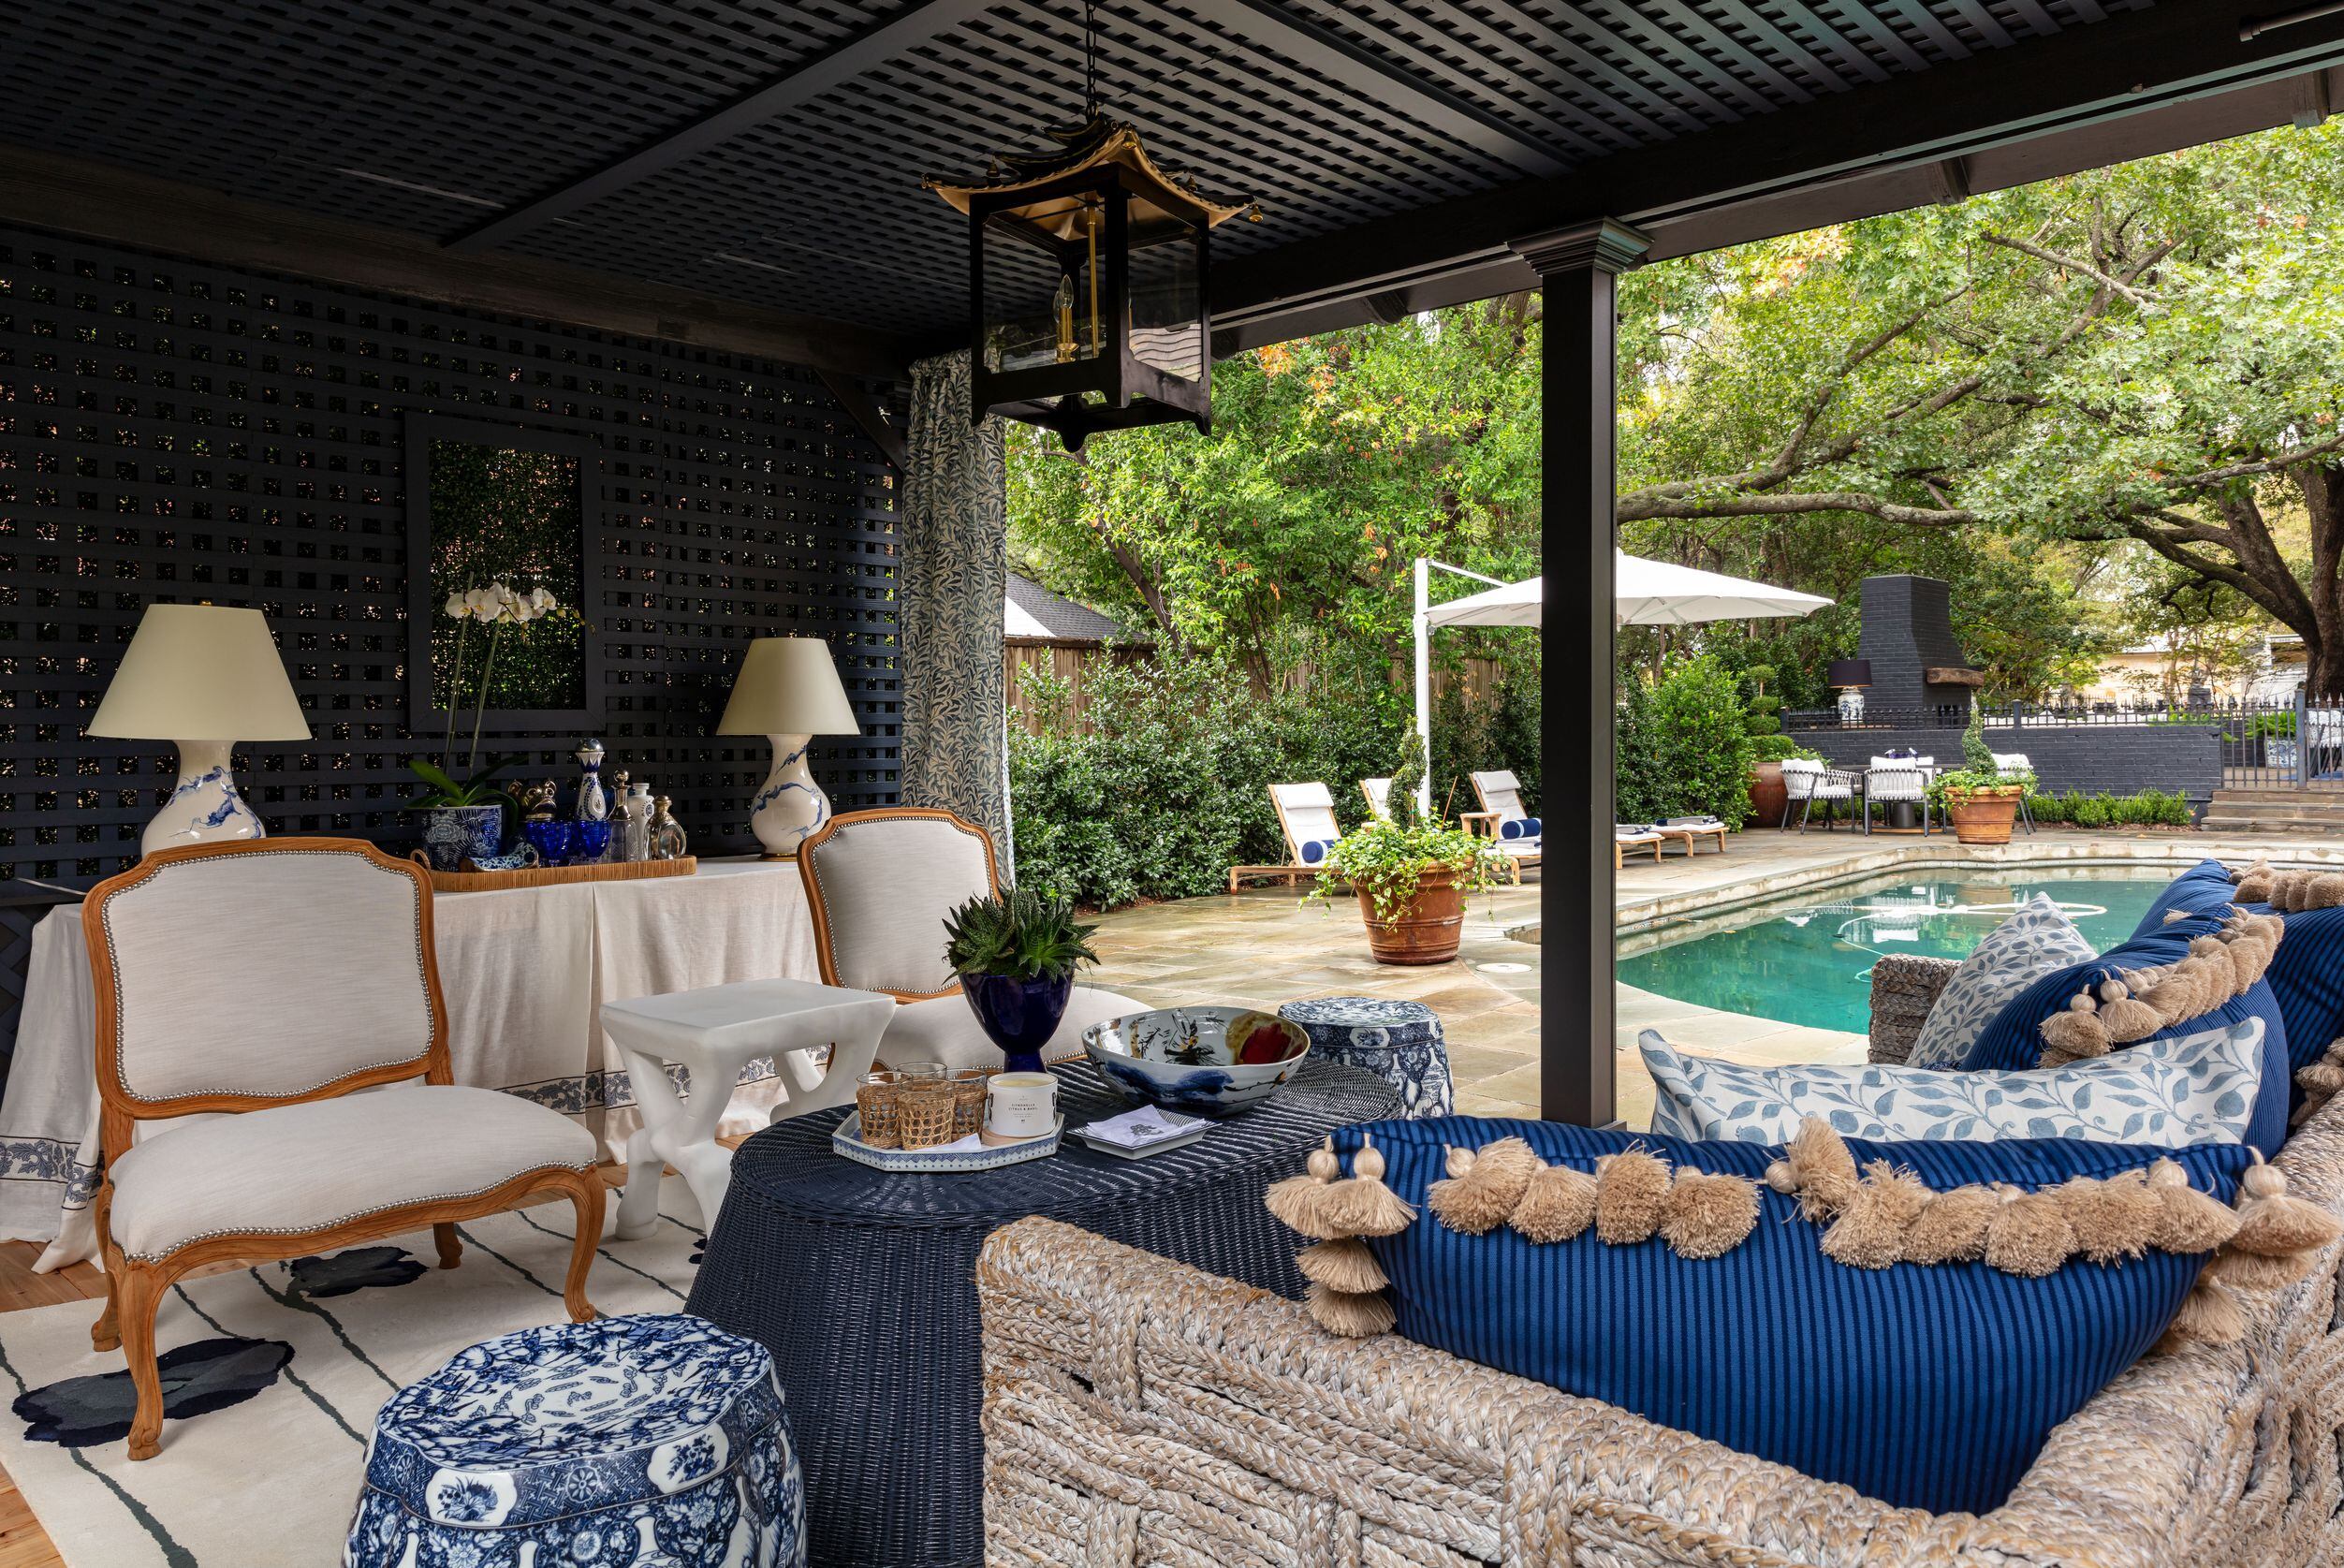 In the pool pavilion, Fiscus chose a Perennials rug, Morris & Co. drapery, a Josh Himmel...